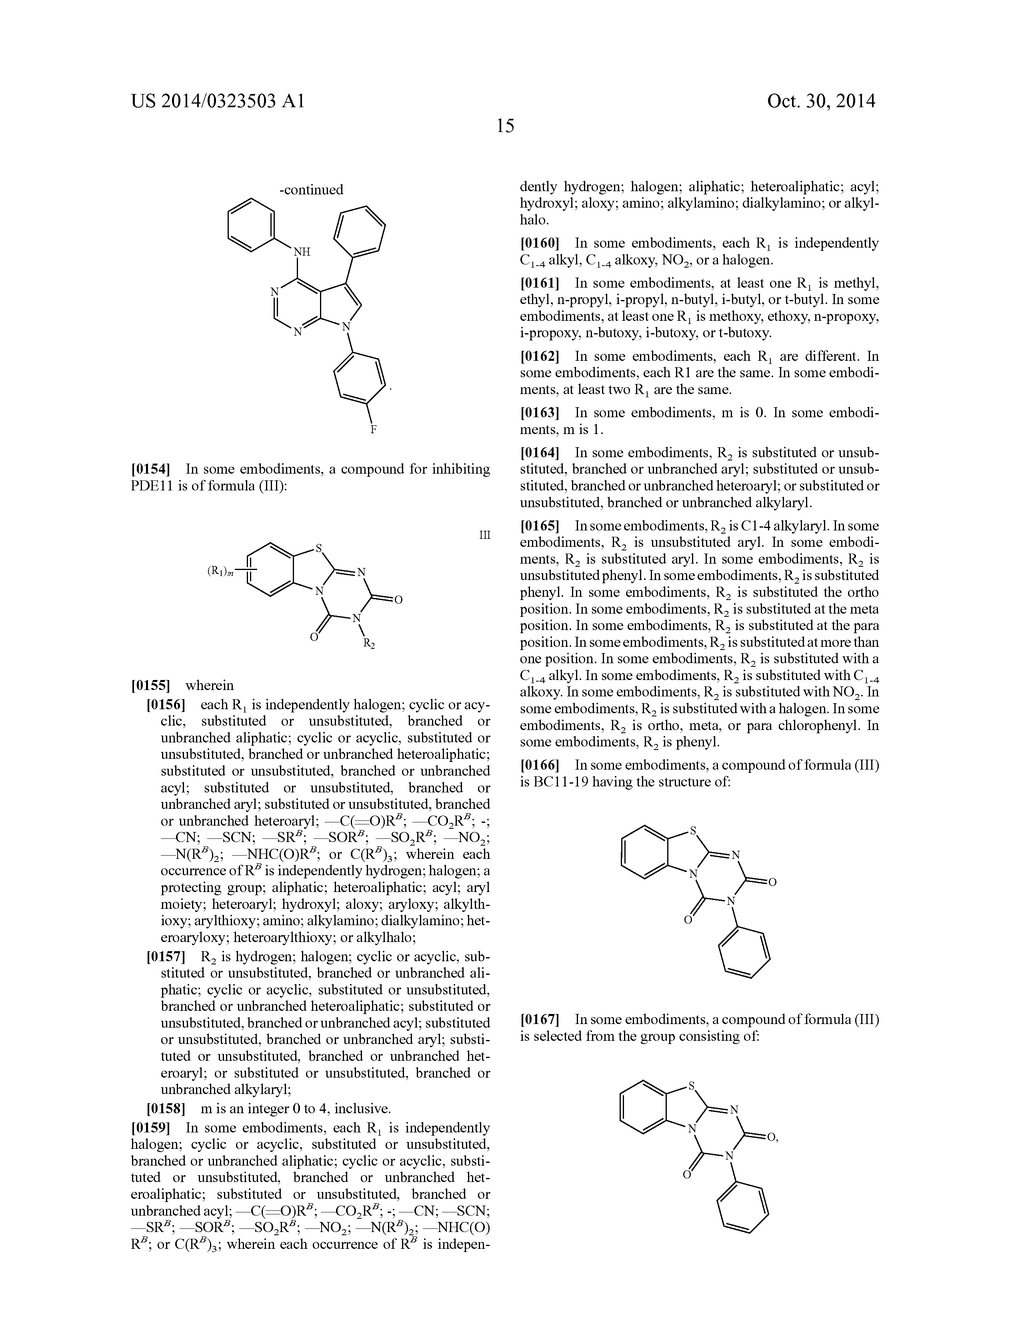 INHIBITORS OF PHOSPODIESTERASES 11 (PDE11) AND METHODS OF USE TO ELEVATE     CORTISOL PRODUCTION - diagram, schematic, and image 35